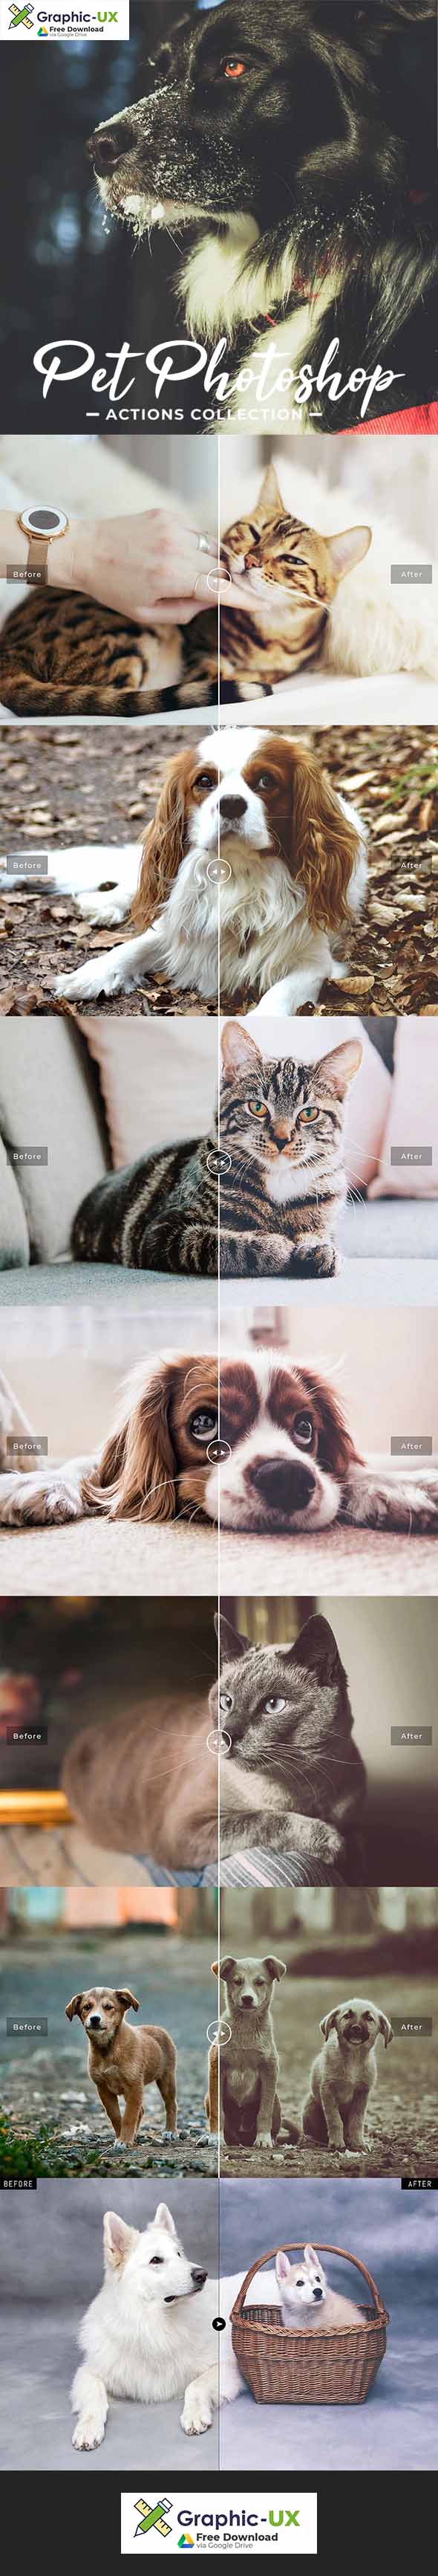 Pet Photoshop Actions Collection 